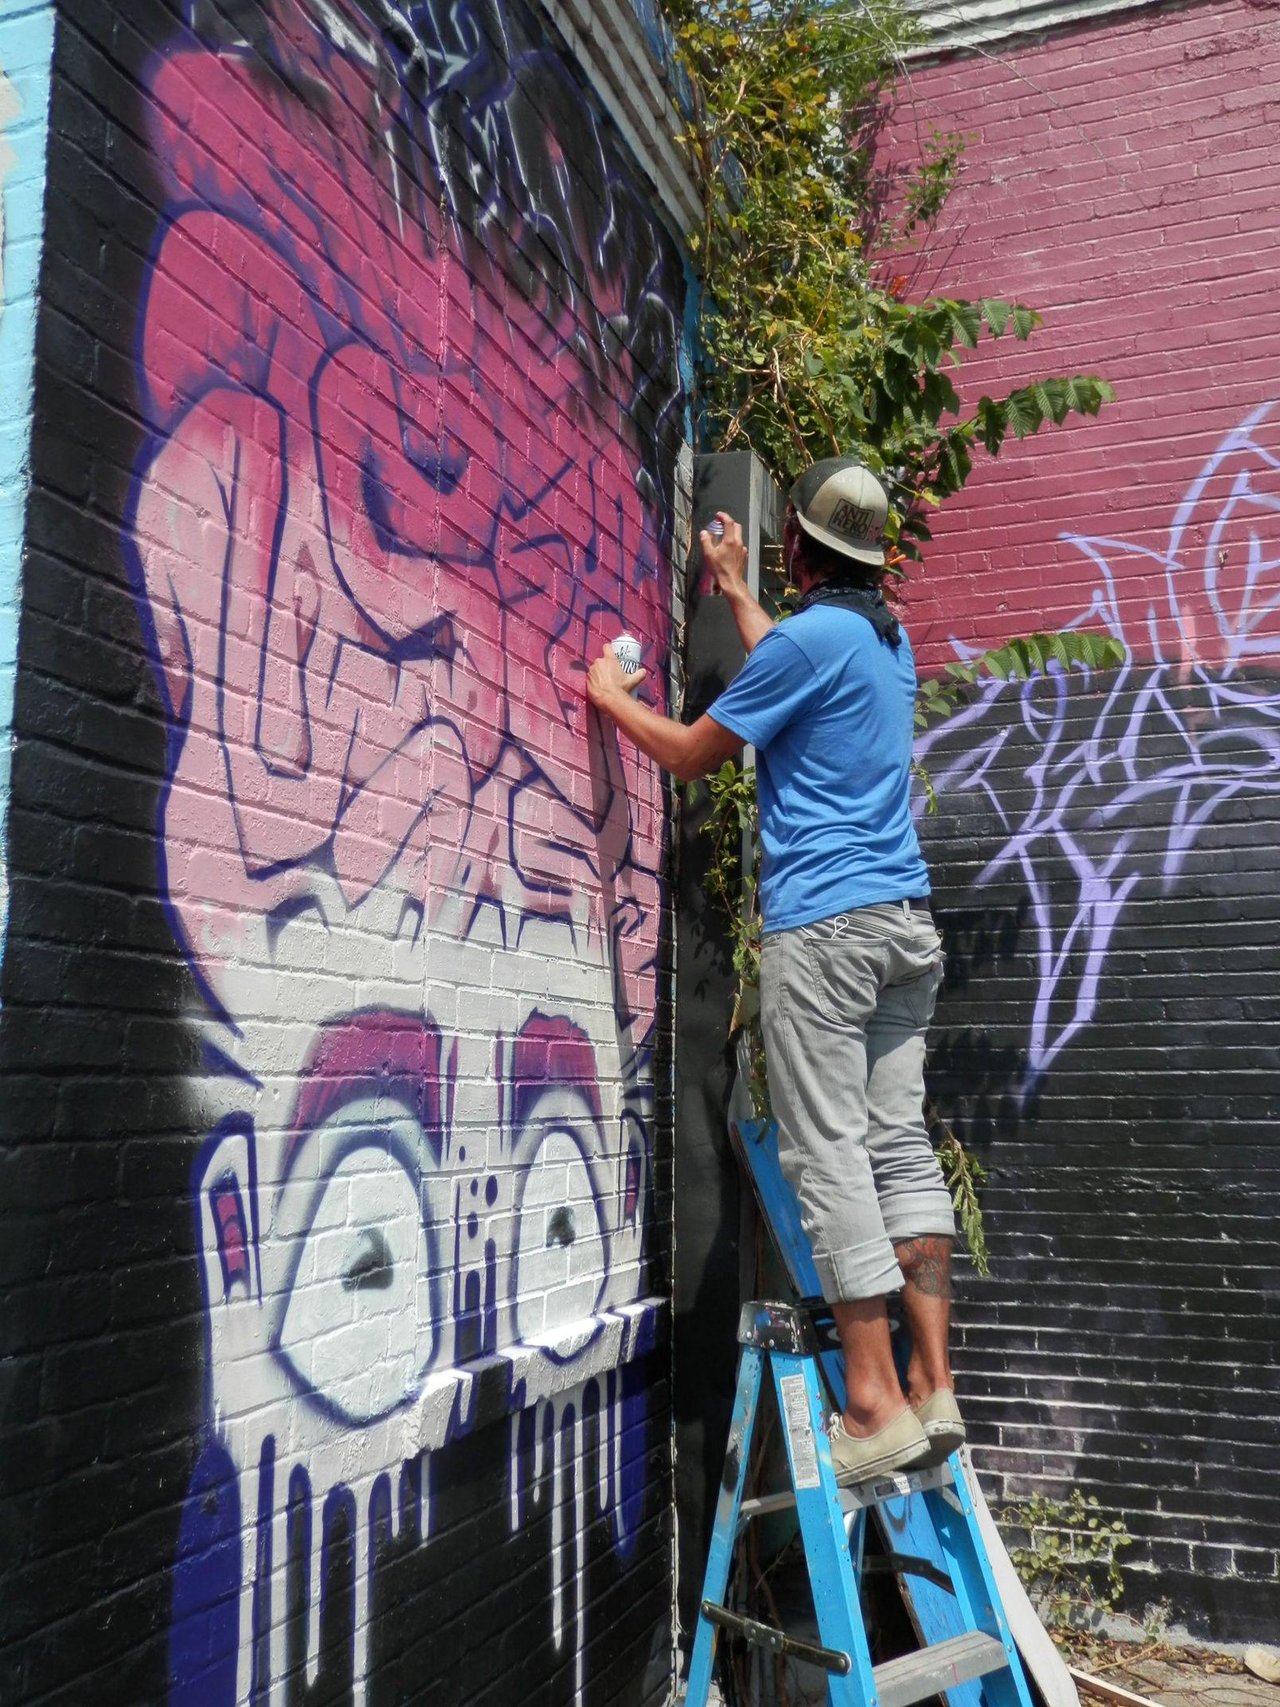 RT @JohnRMoffitt: #Houston #Graffiti #Streetart Man with Pencil was up here from Austin, working at Meeting of Styles all day Saturday. http://t.co/Djoq0ESf0G